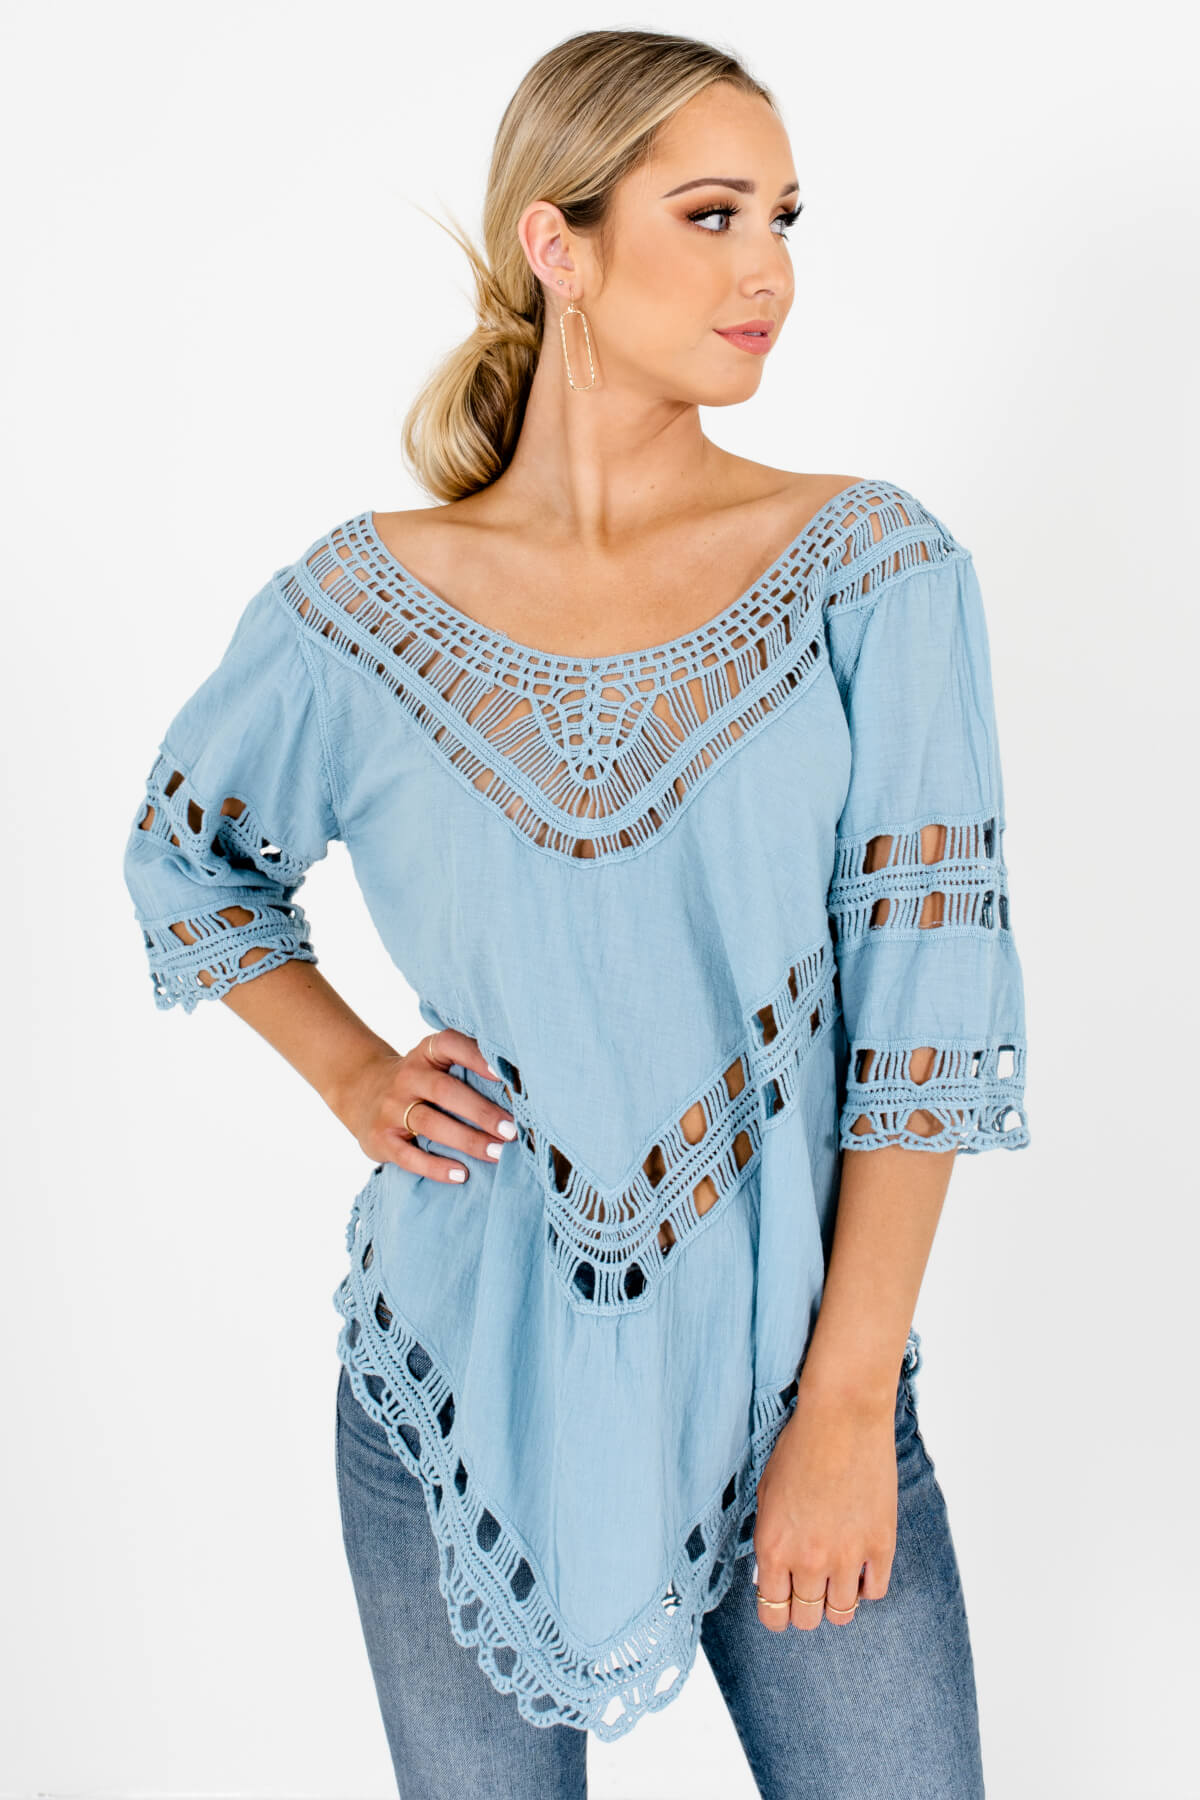 Blue Semi-Sheer Material Boutique Tops for Women